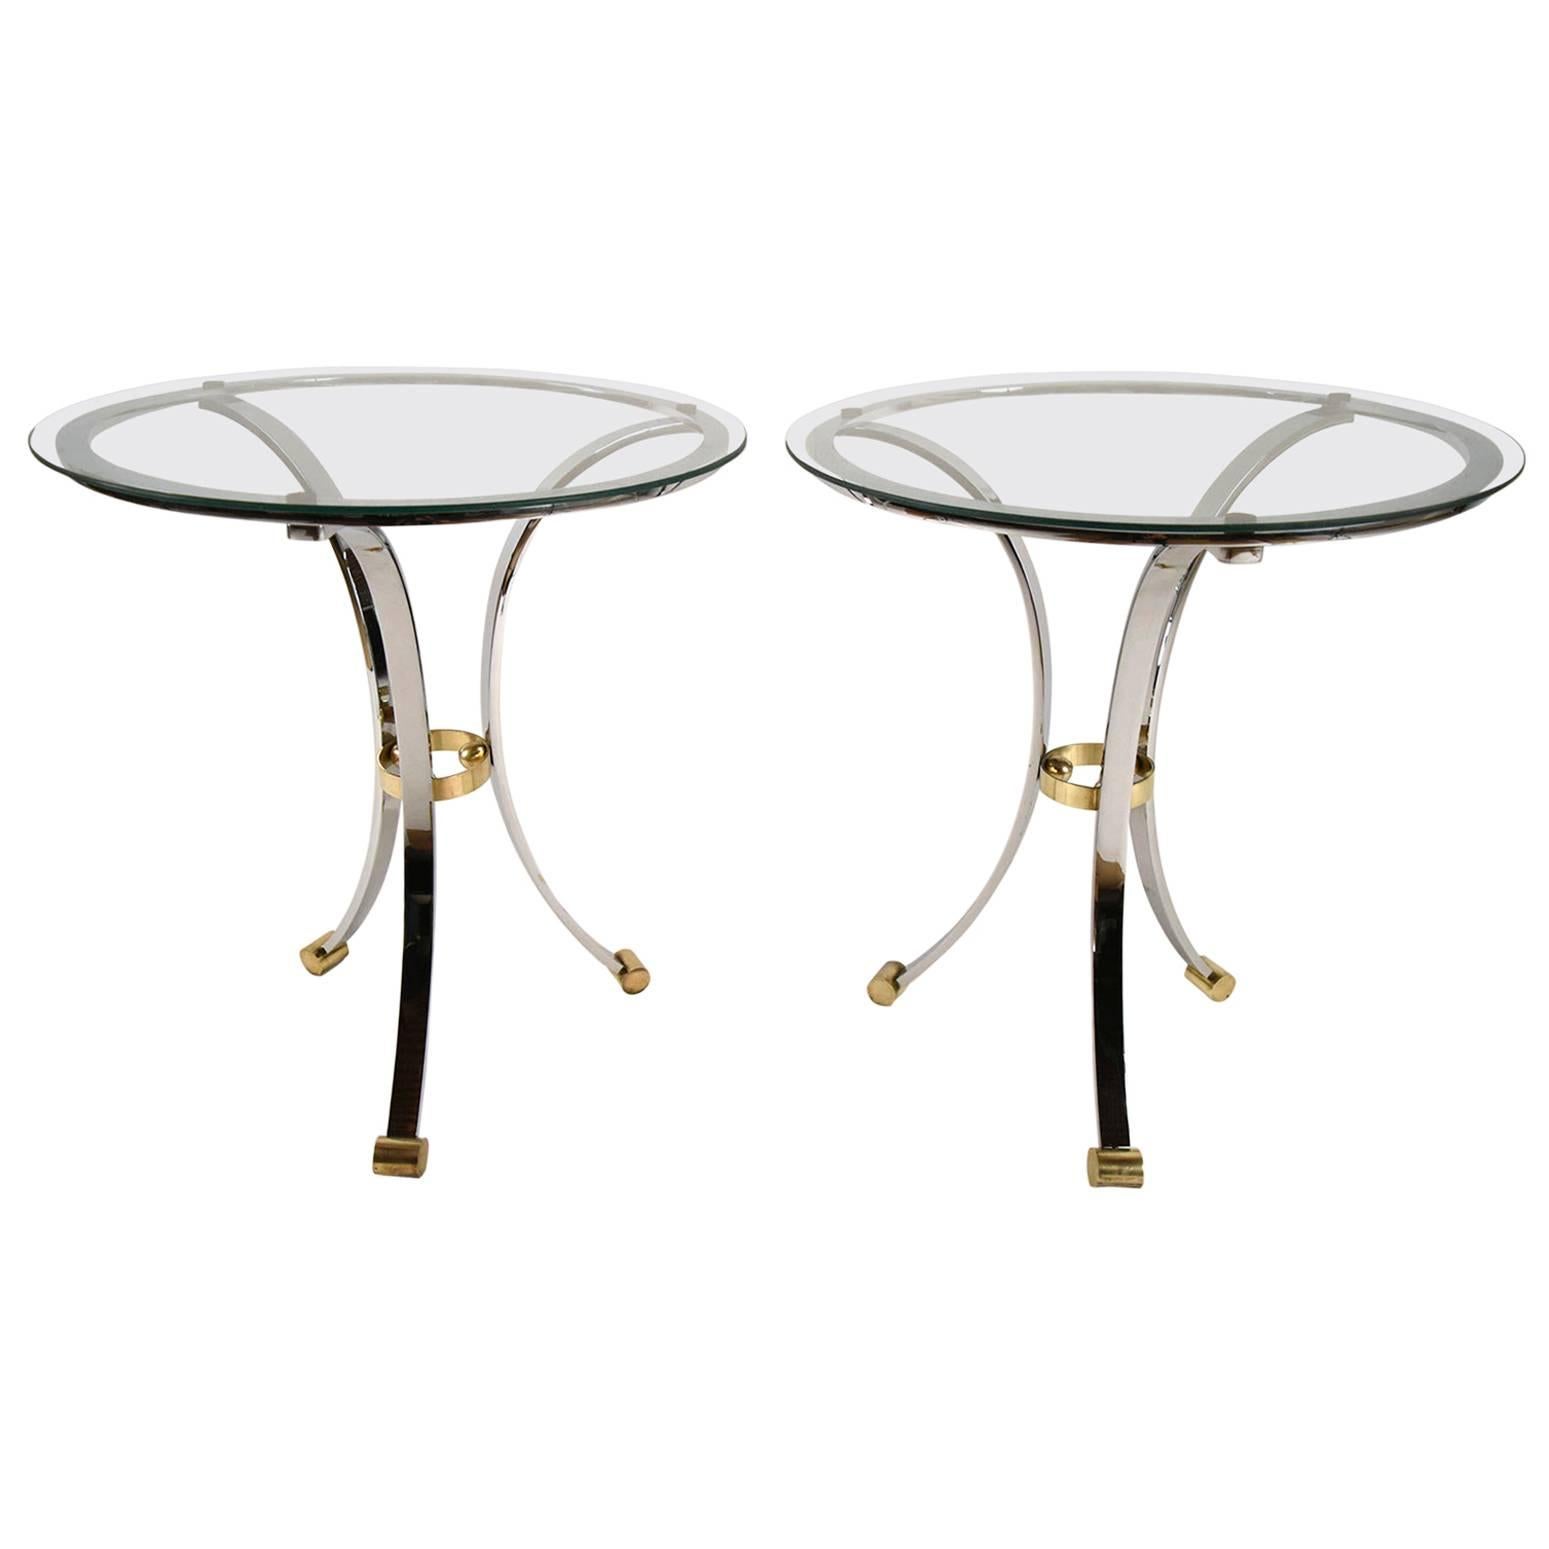 Pair of Maison Jensen Round Chrome and Brass End Tables